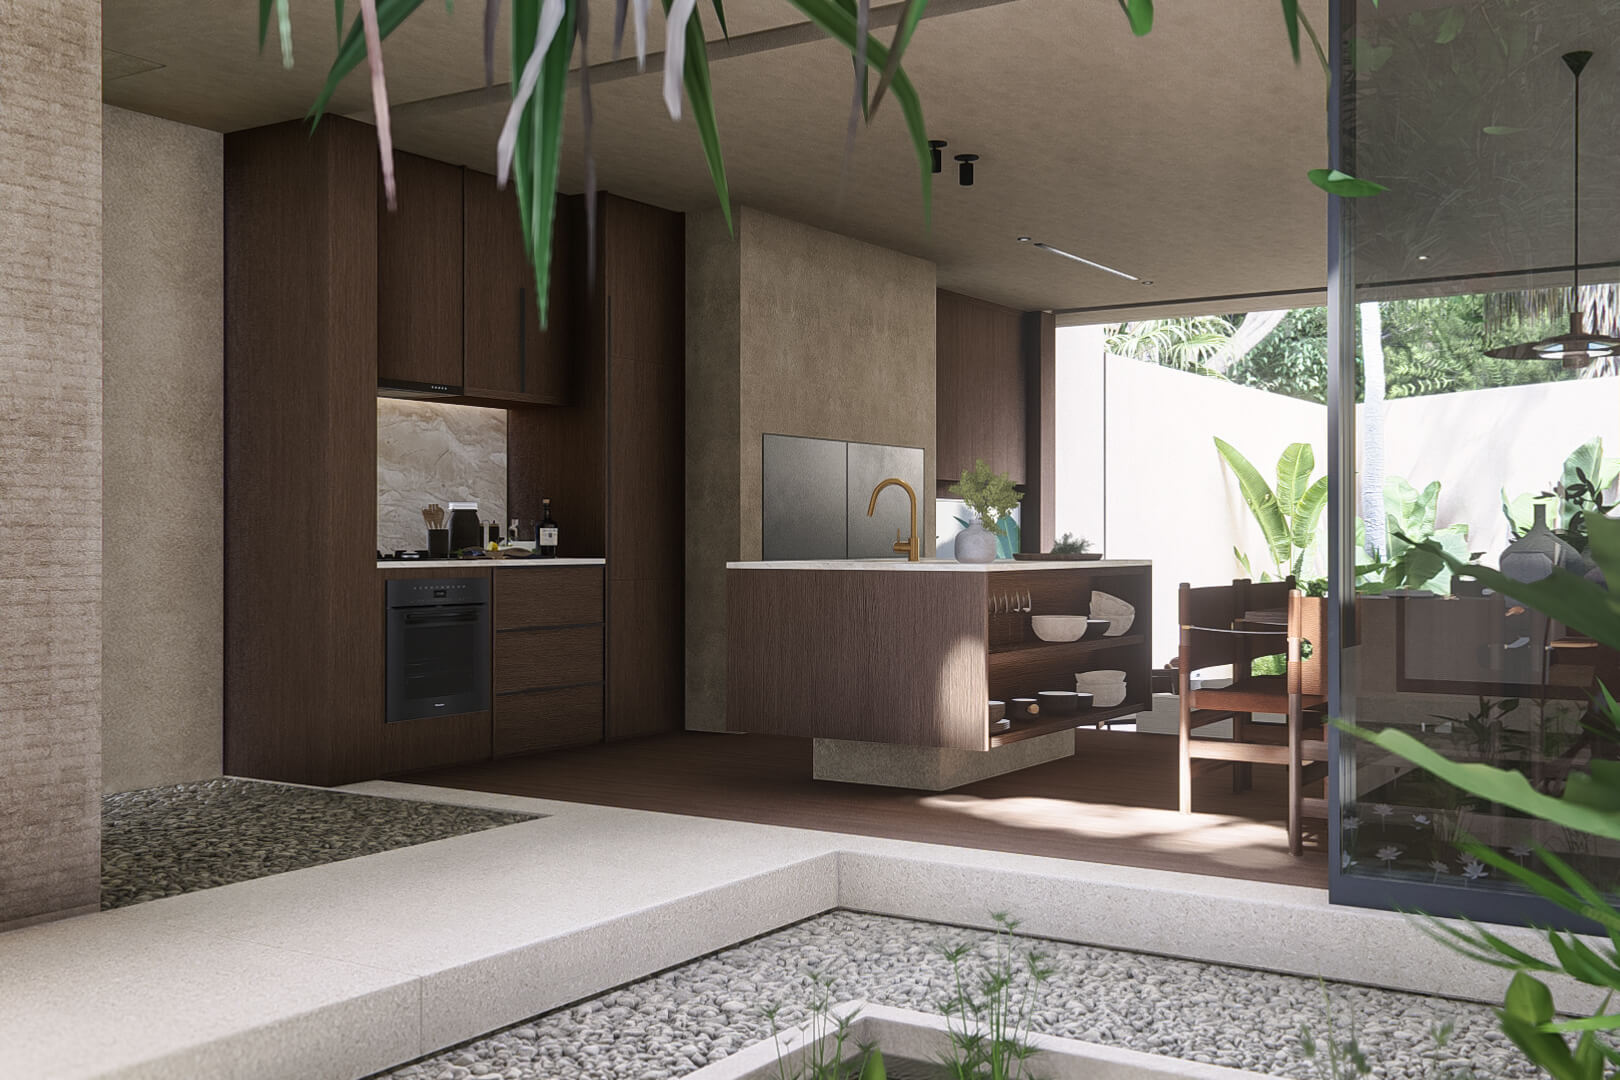 Leaf berawa townhouses kitchen and dining space from fish pond